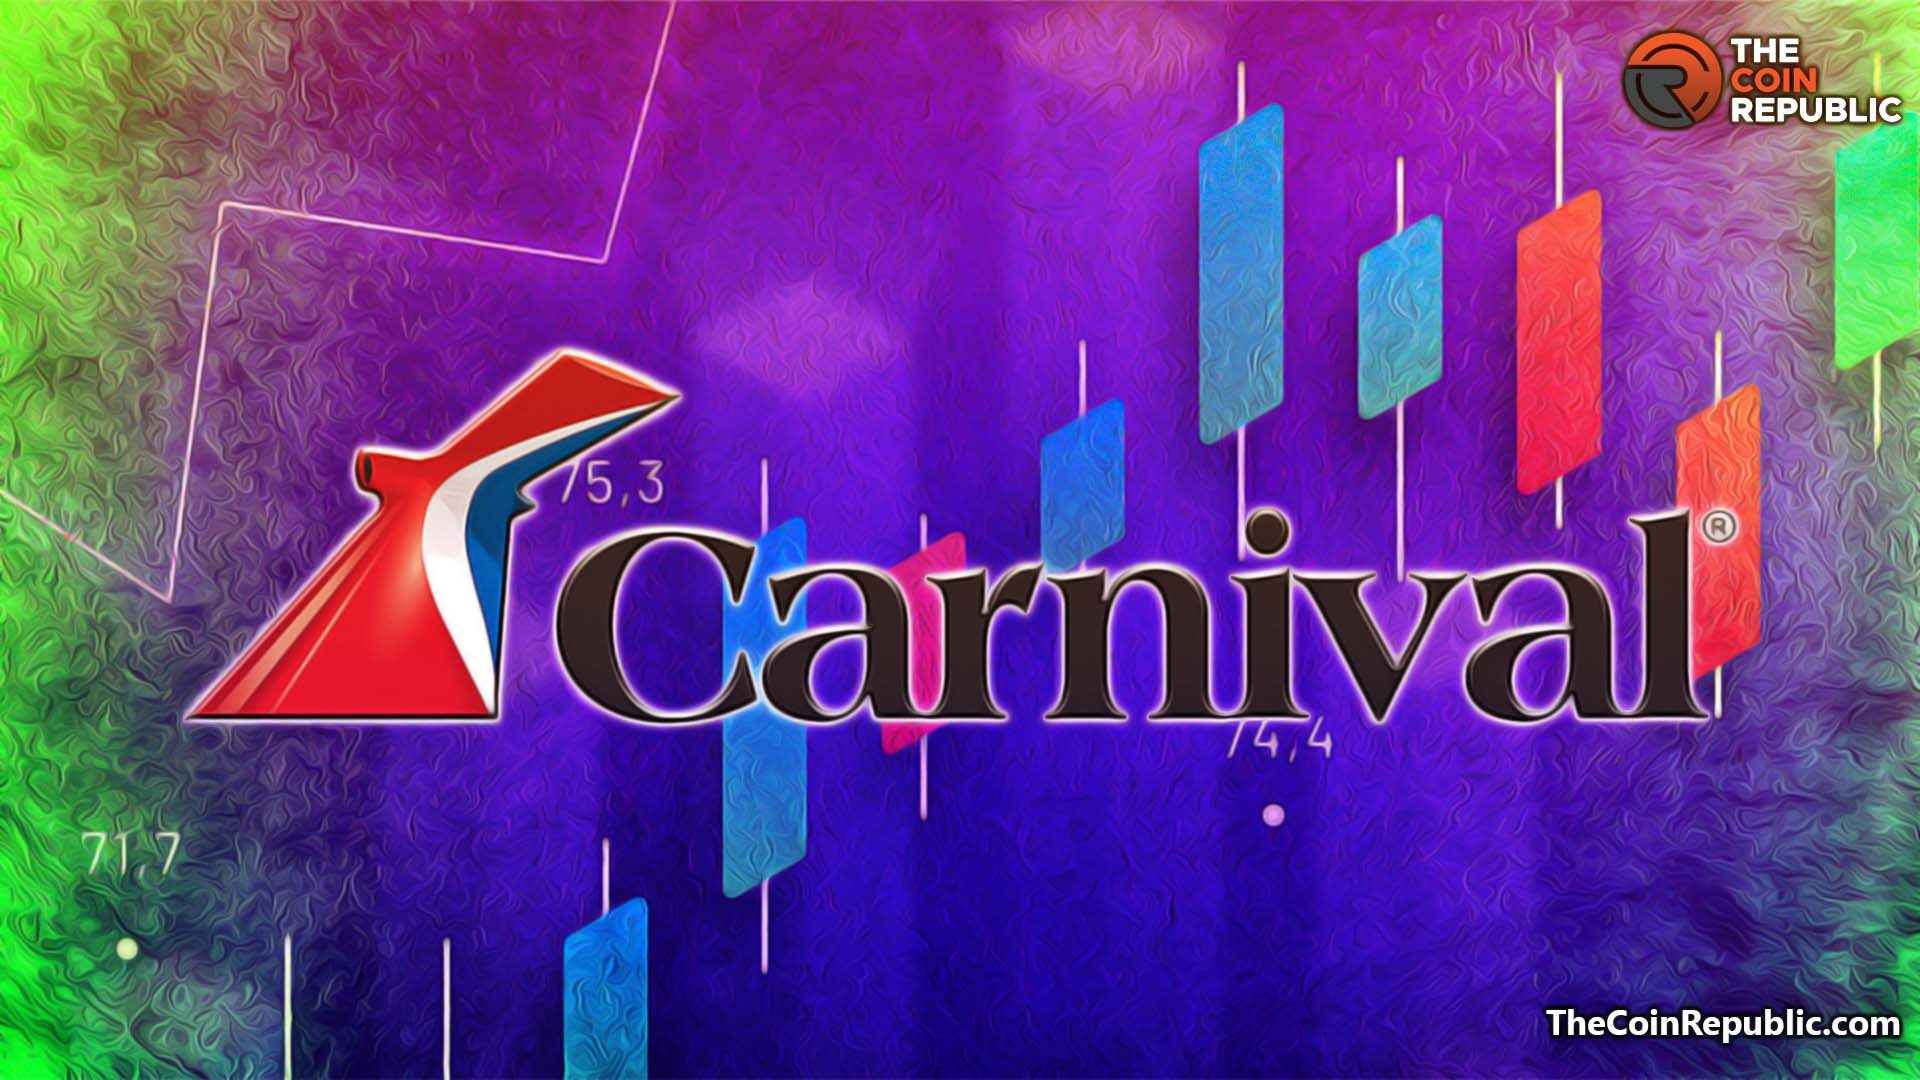 Carnival Stock: CCL stock price may reach $15? Know why?